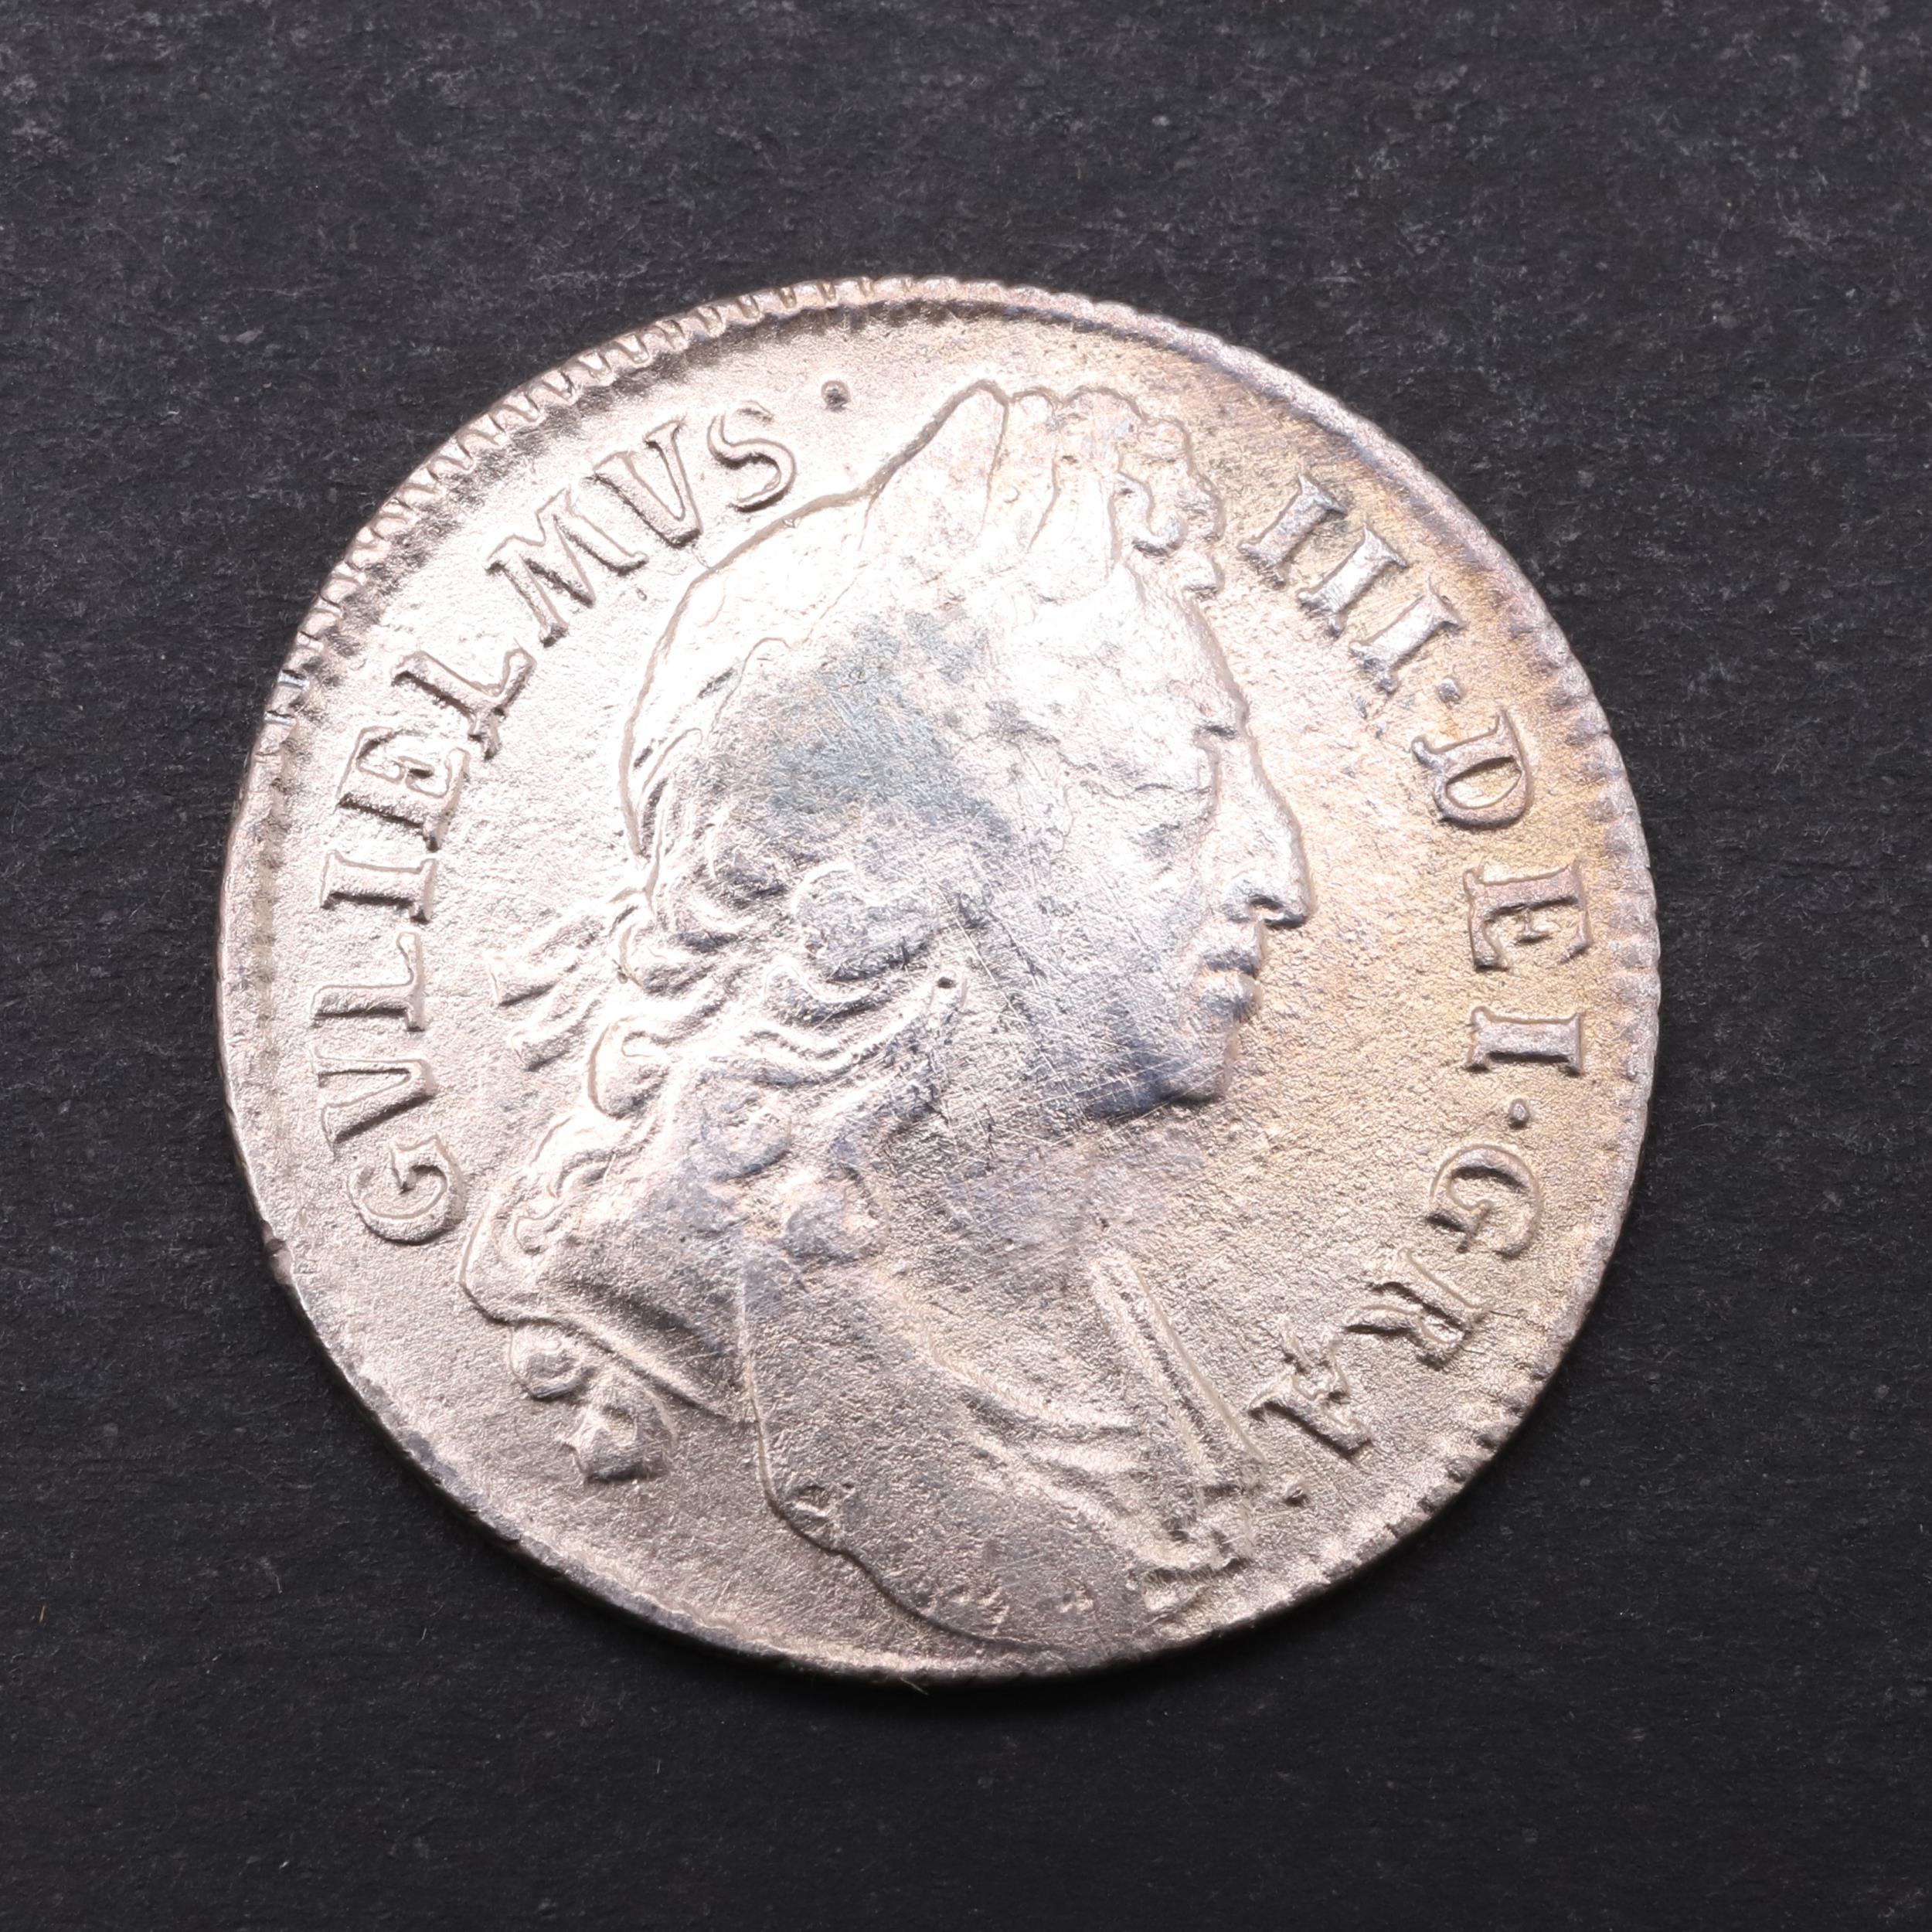 A WILLIAM III SHILLING, 1696, FROM THE WRECK OF THE ASSOCIATION.